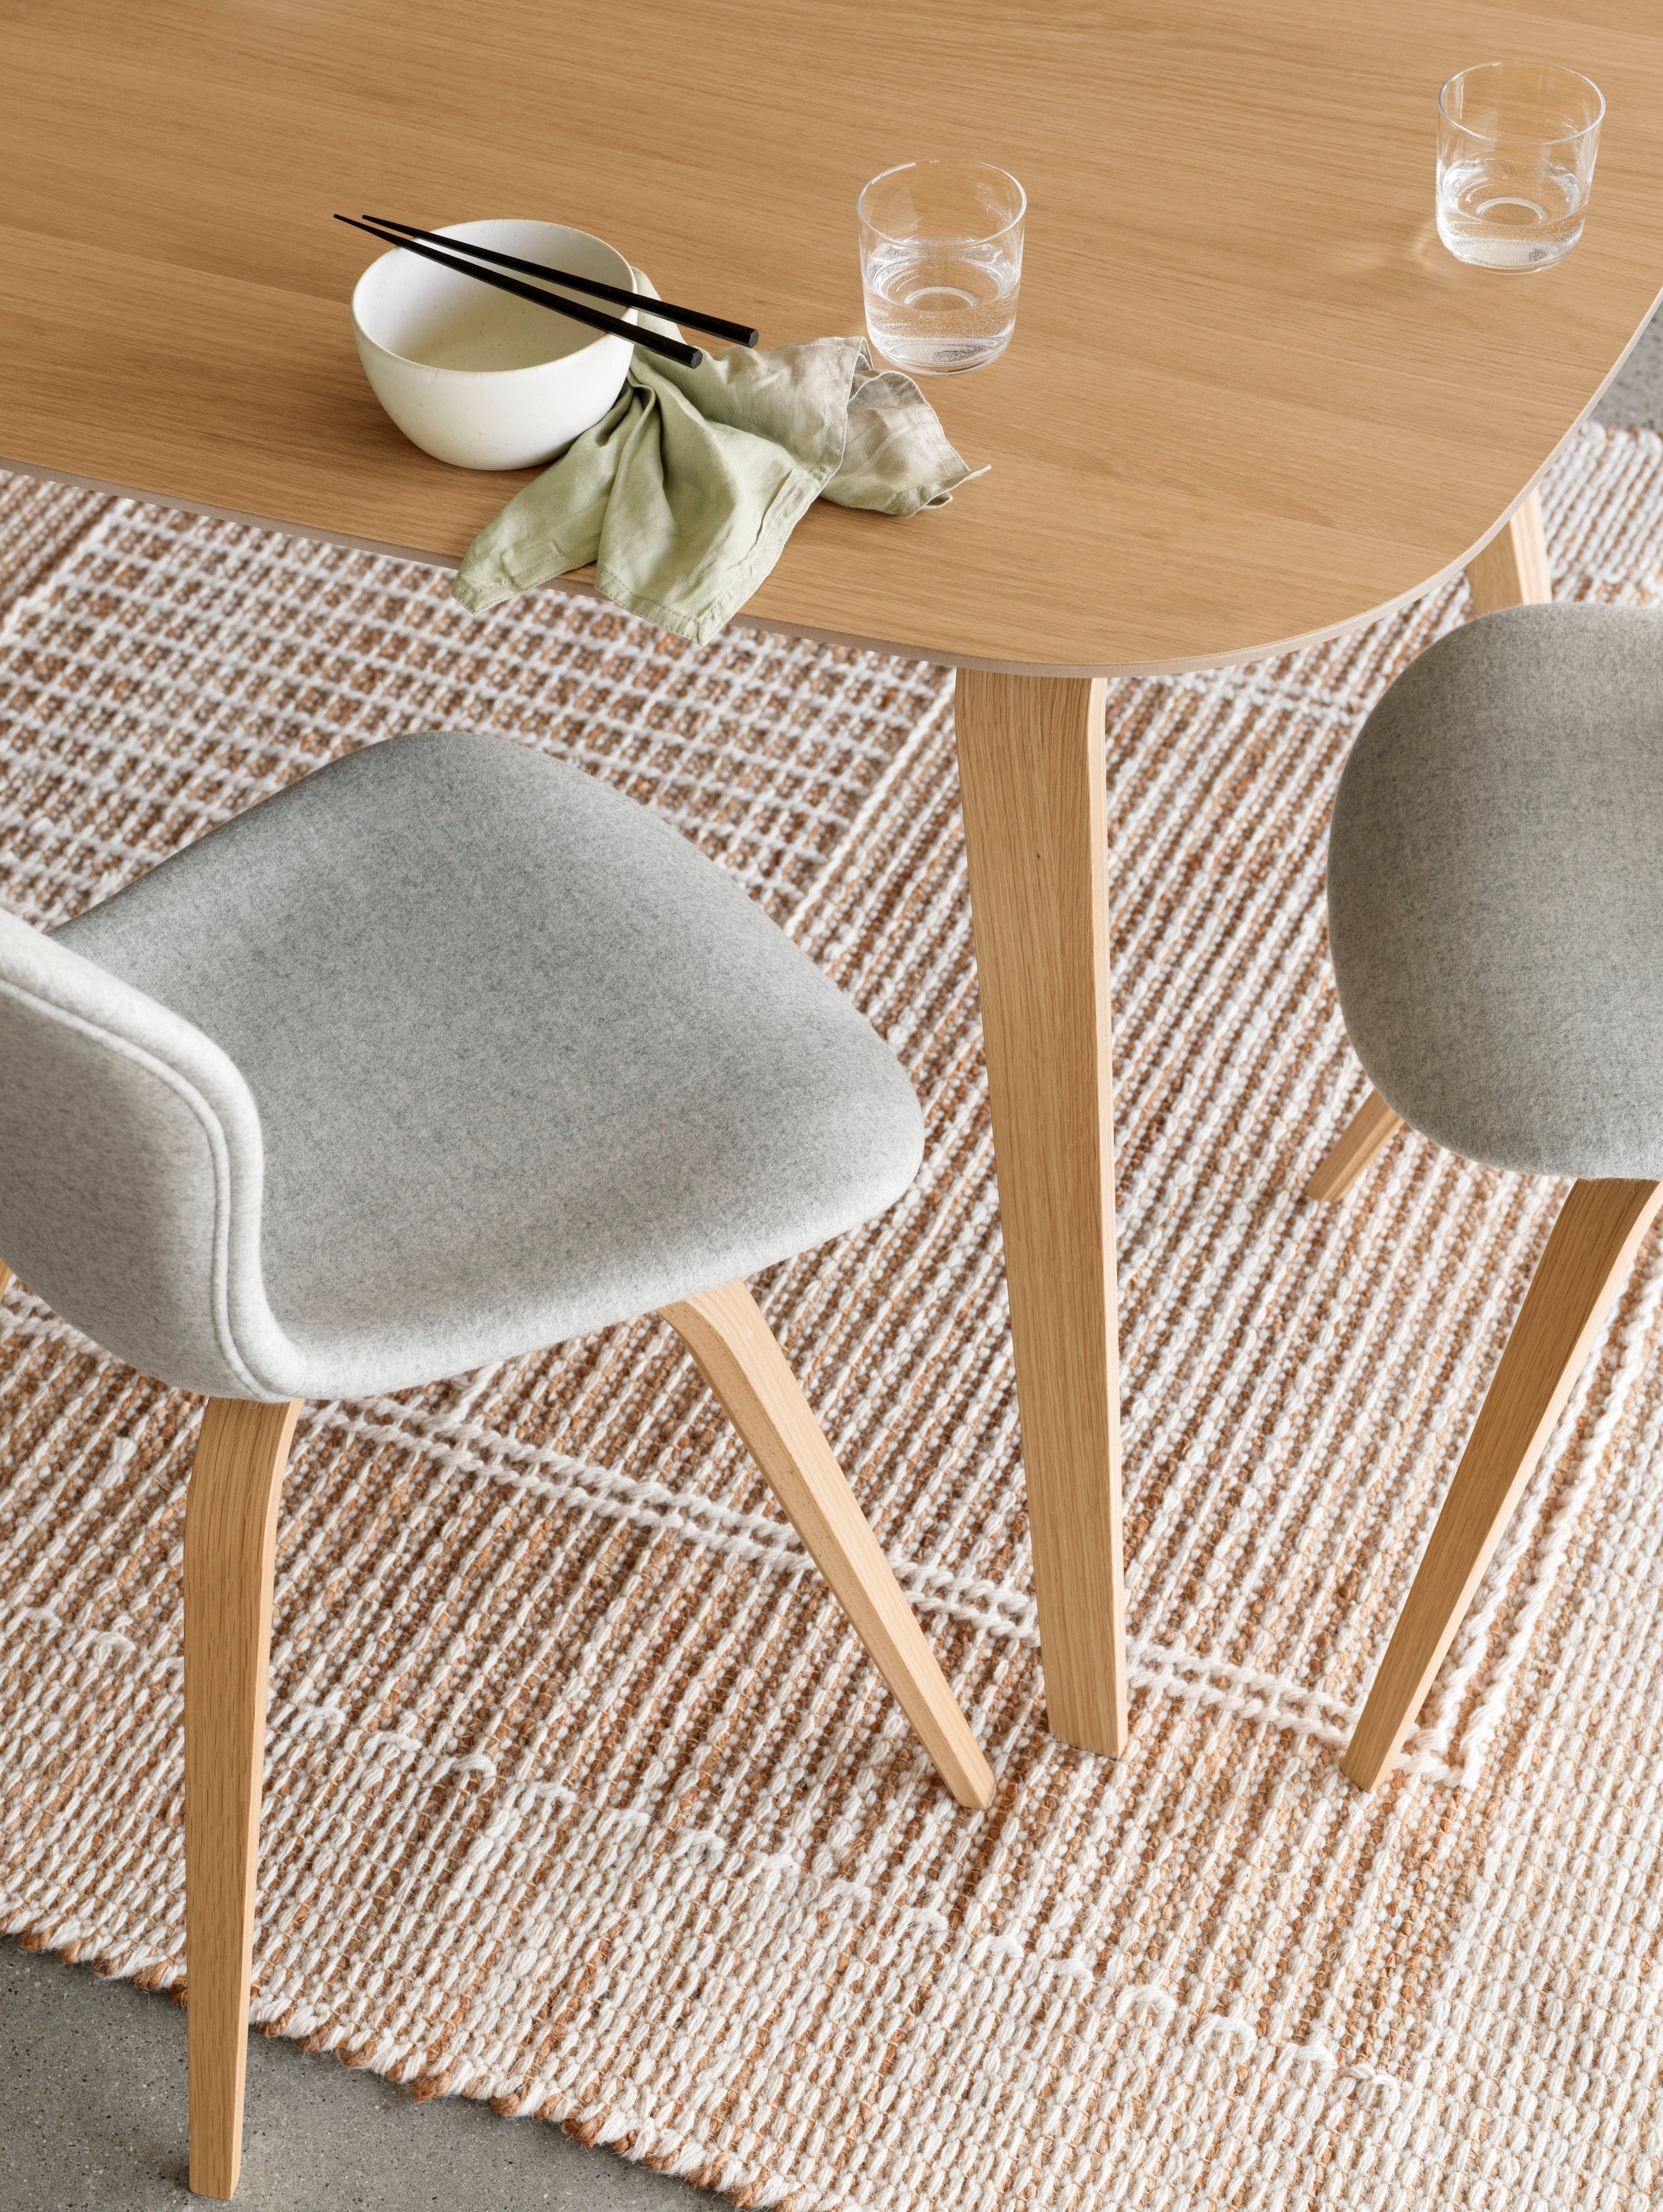 A closer look at a white Hauge dining chair